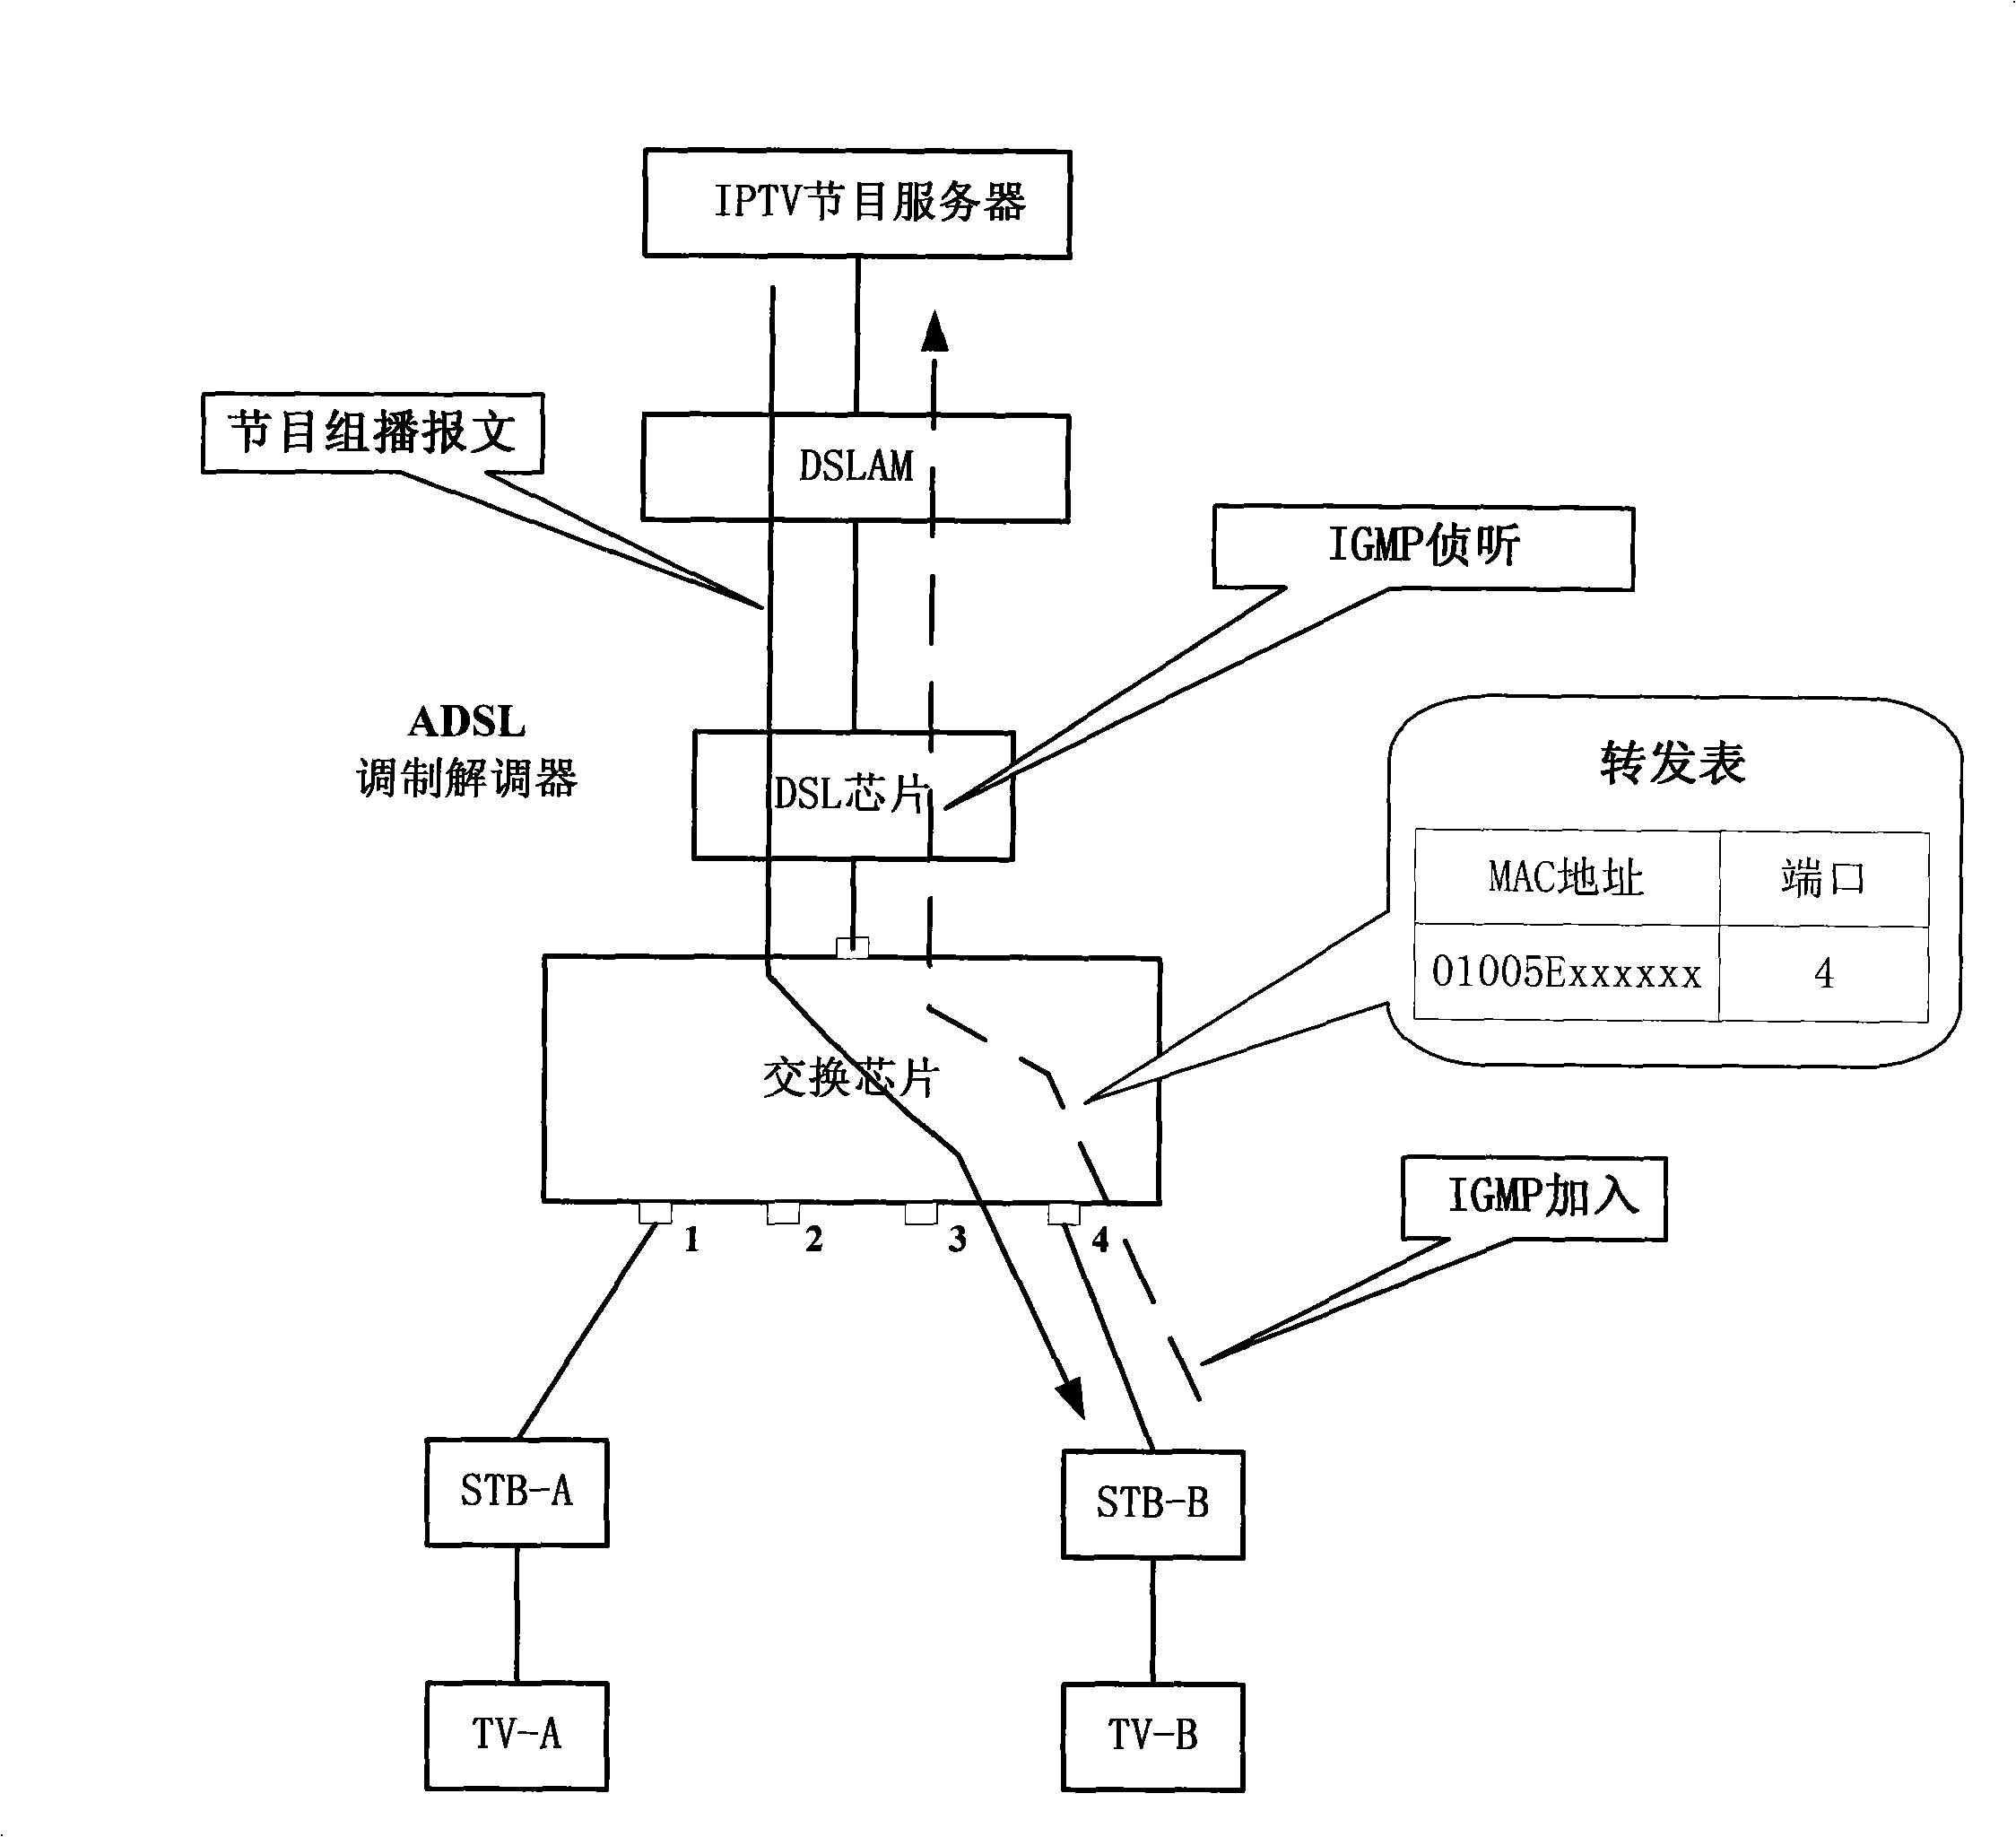 Method realizing IGMP interception function on modem device with 4 ethernet interfaces